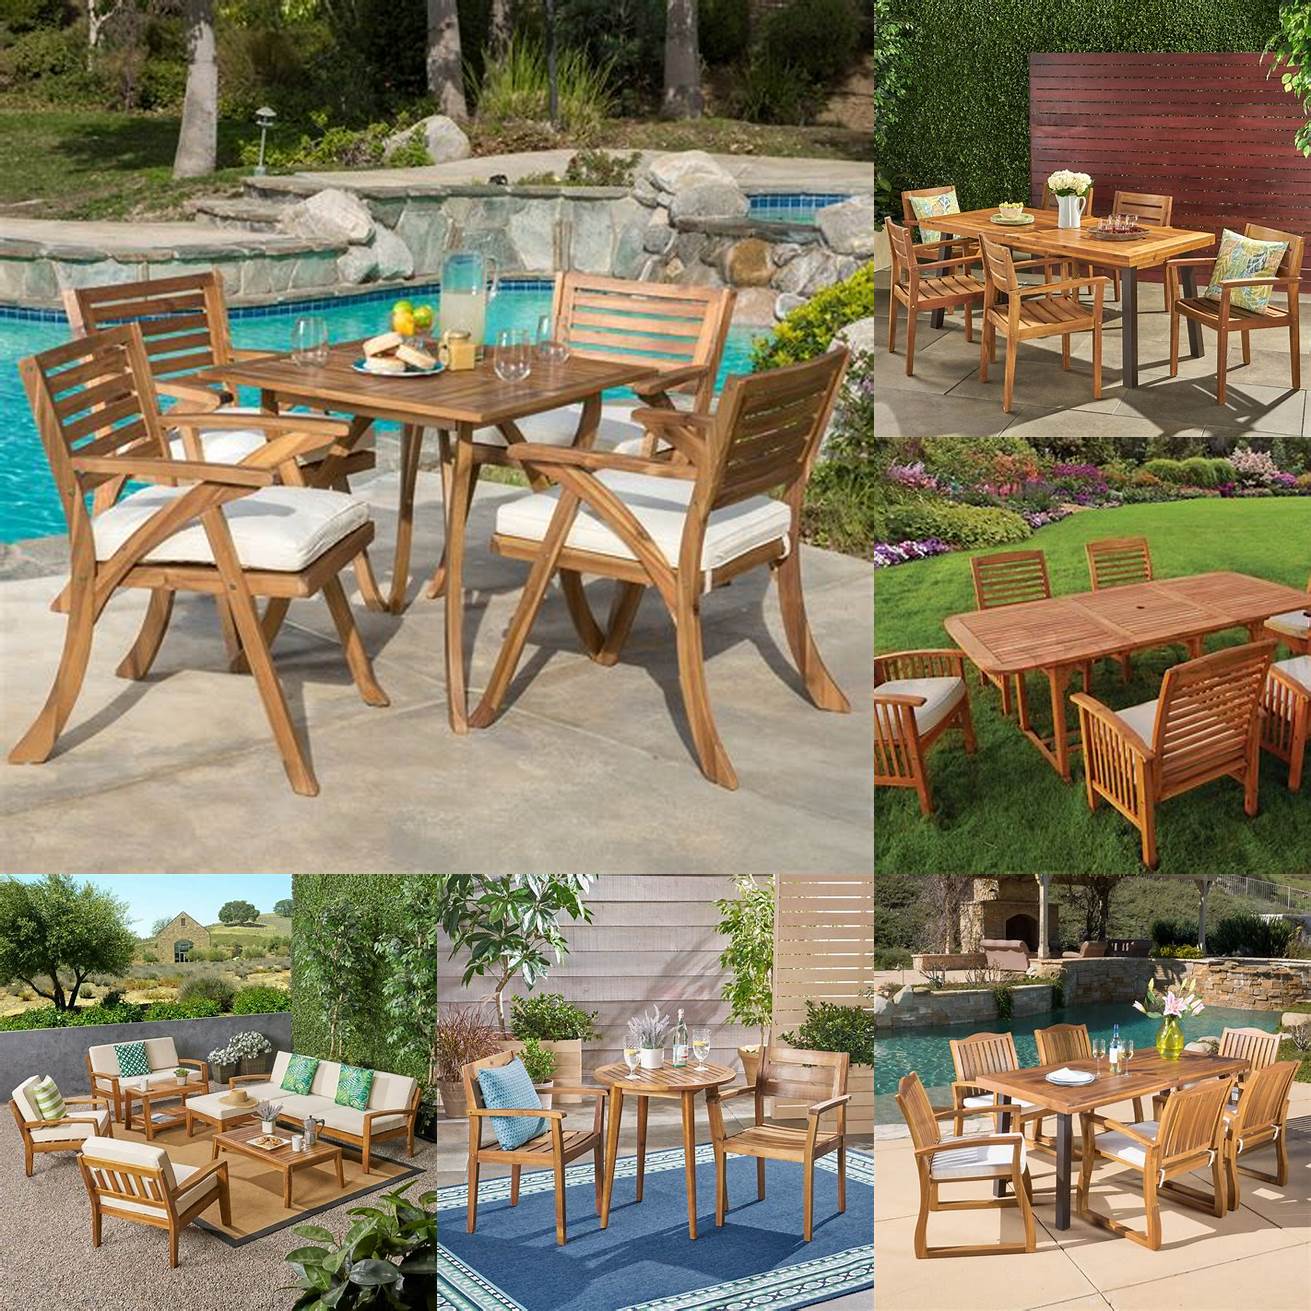 Photo of Acacia and Teak furniture being used in the same outdoor setting